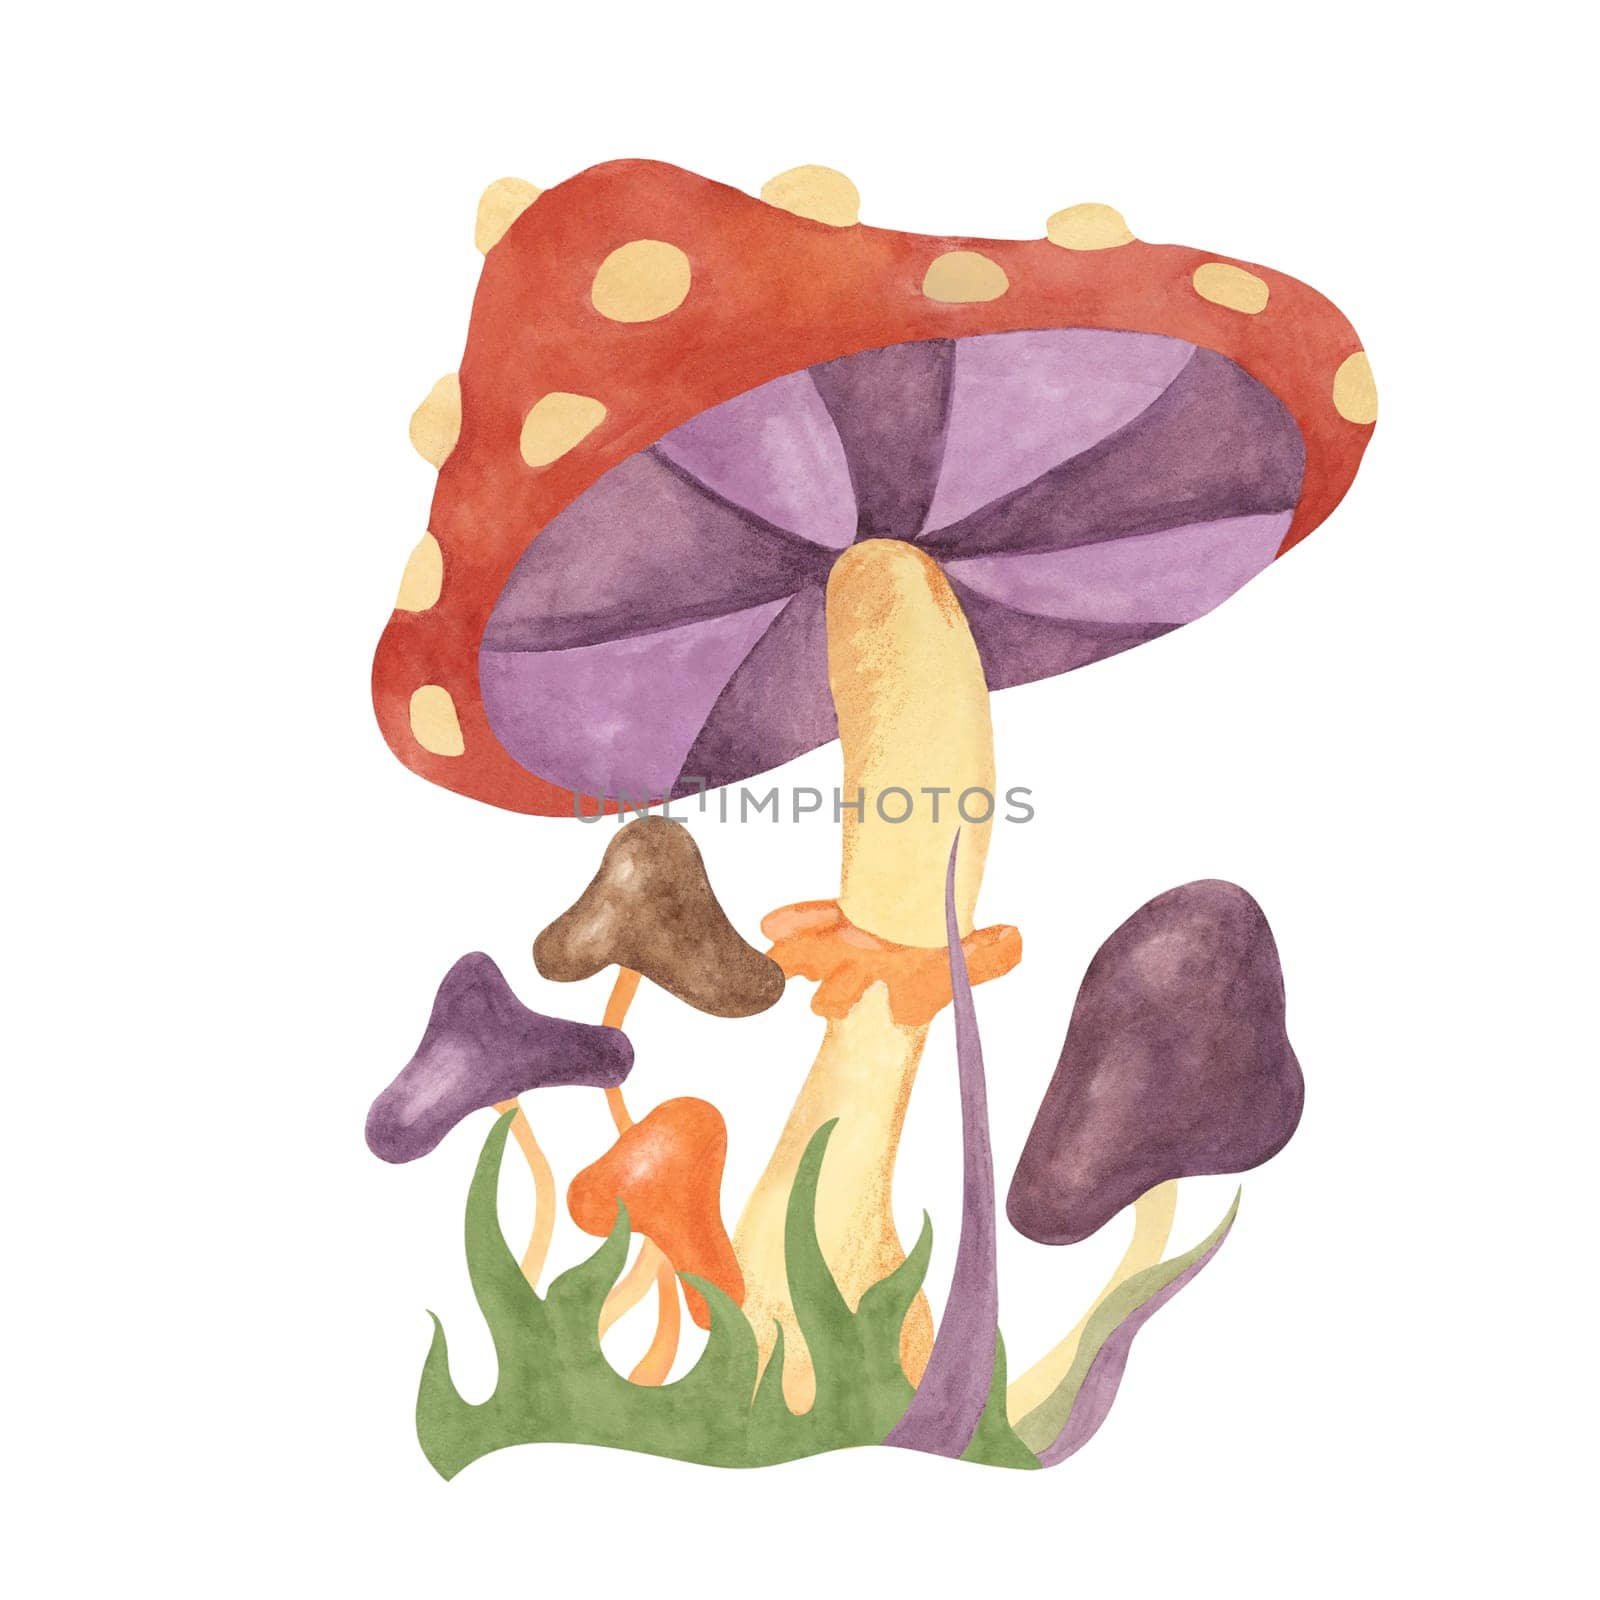 Retro hippie mushrooms and fly agaric in 1970s style. Hippie psychedelic groovy fungus clipart. Watercolor indie illustration for flower power sticker, nostalgic design, printing, quote, t-shirt